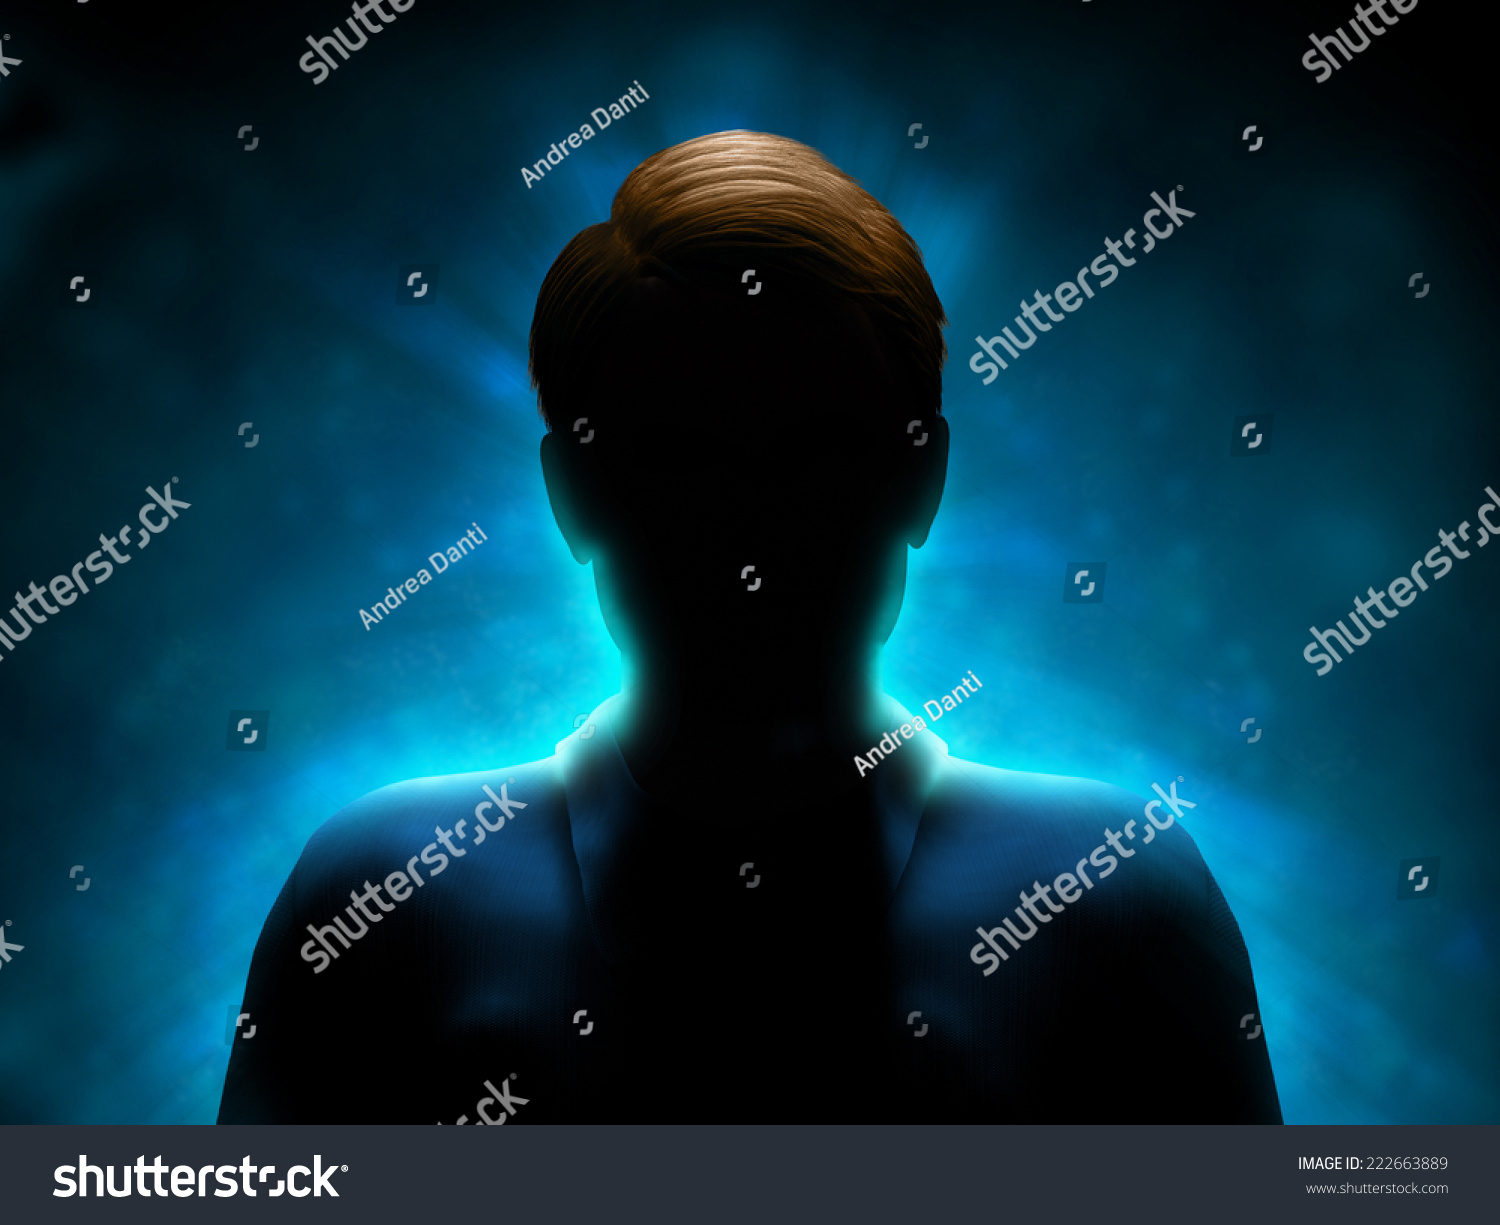 Silhouette of a mysterious figure with a strong blue back-light. Digital illustration. #222663889